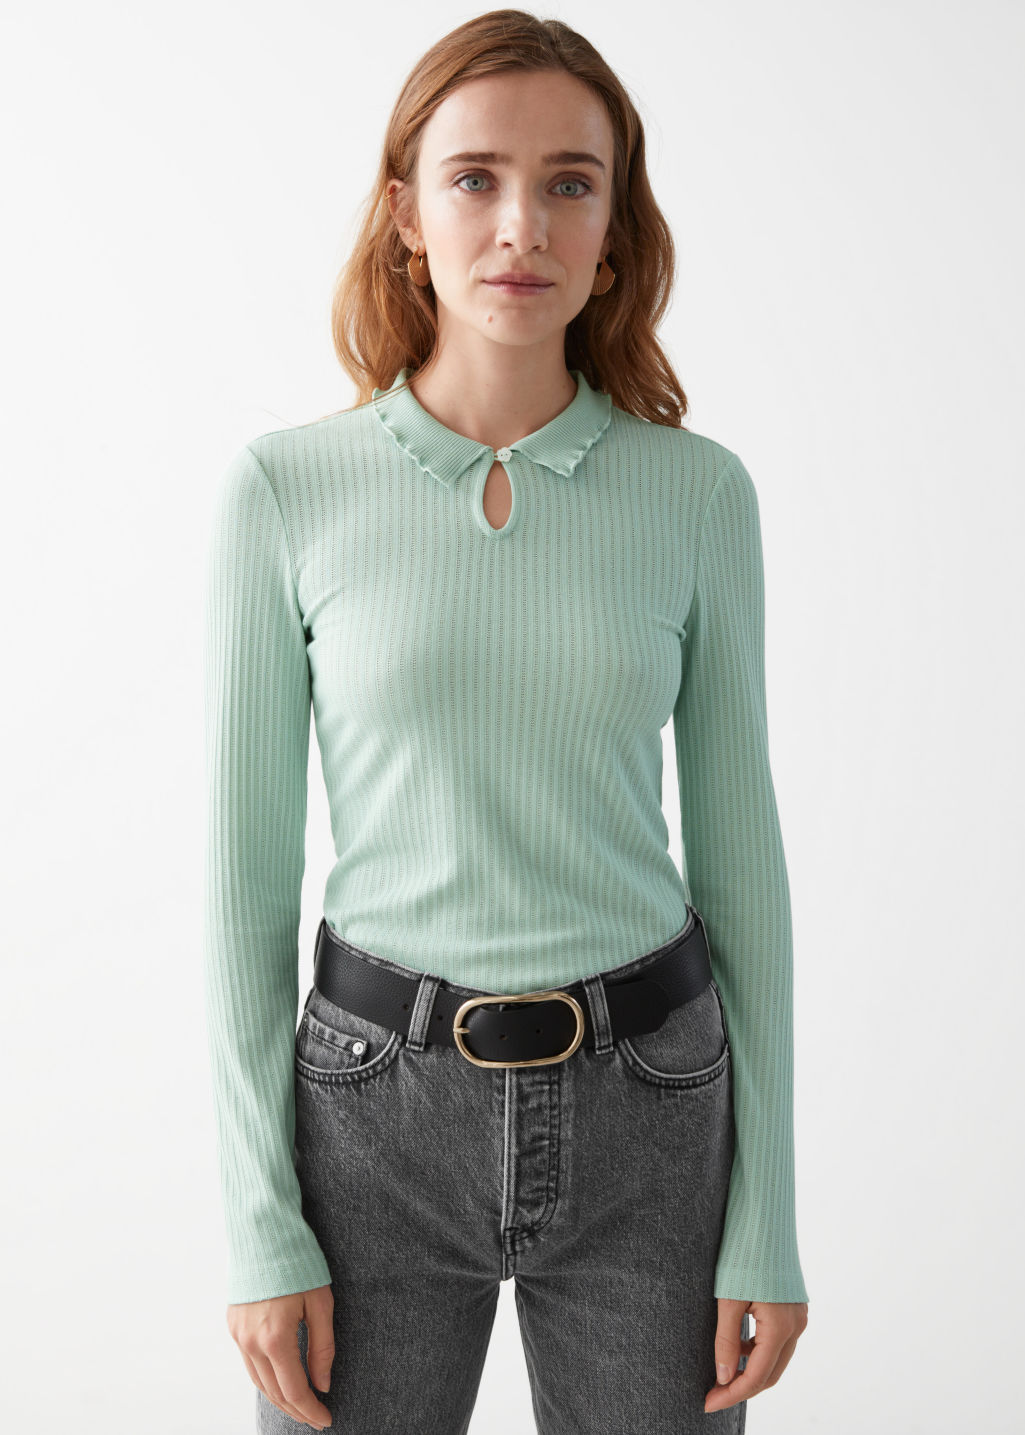 Lettuce Collar Rib Top - Mint - Tops & T-shirts - & Other Stories